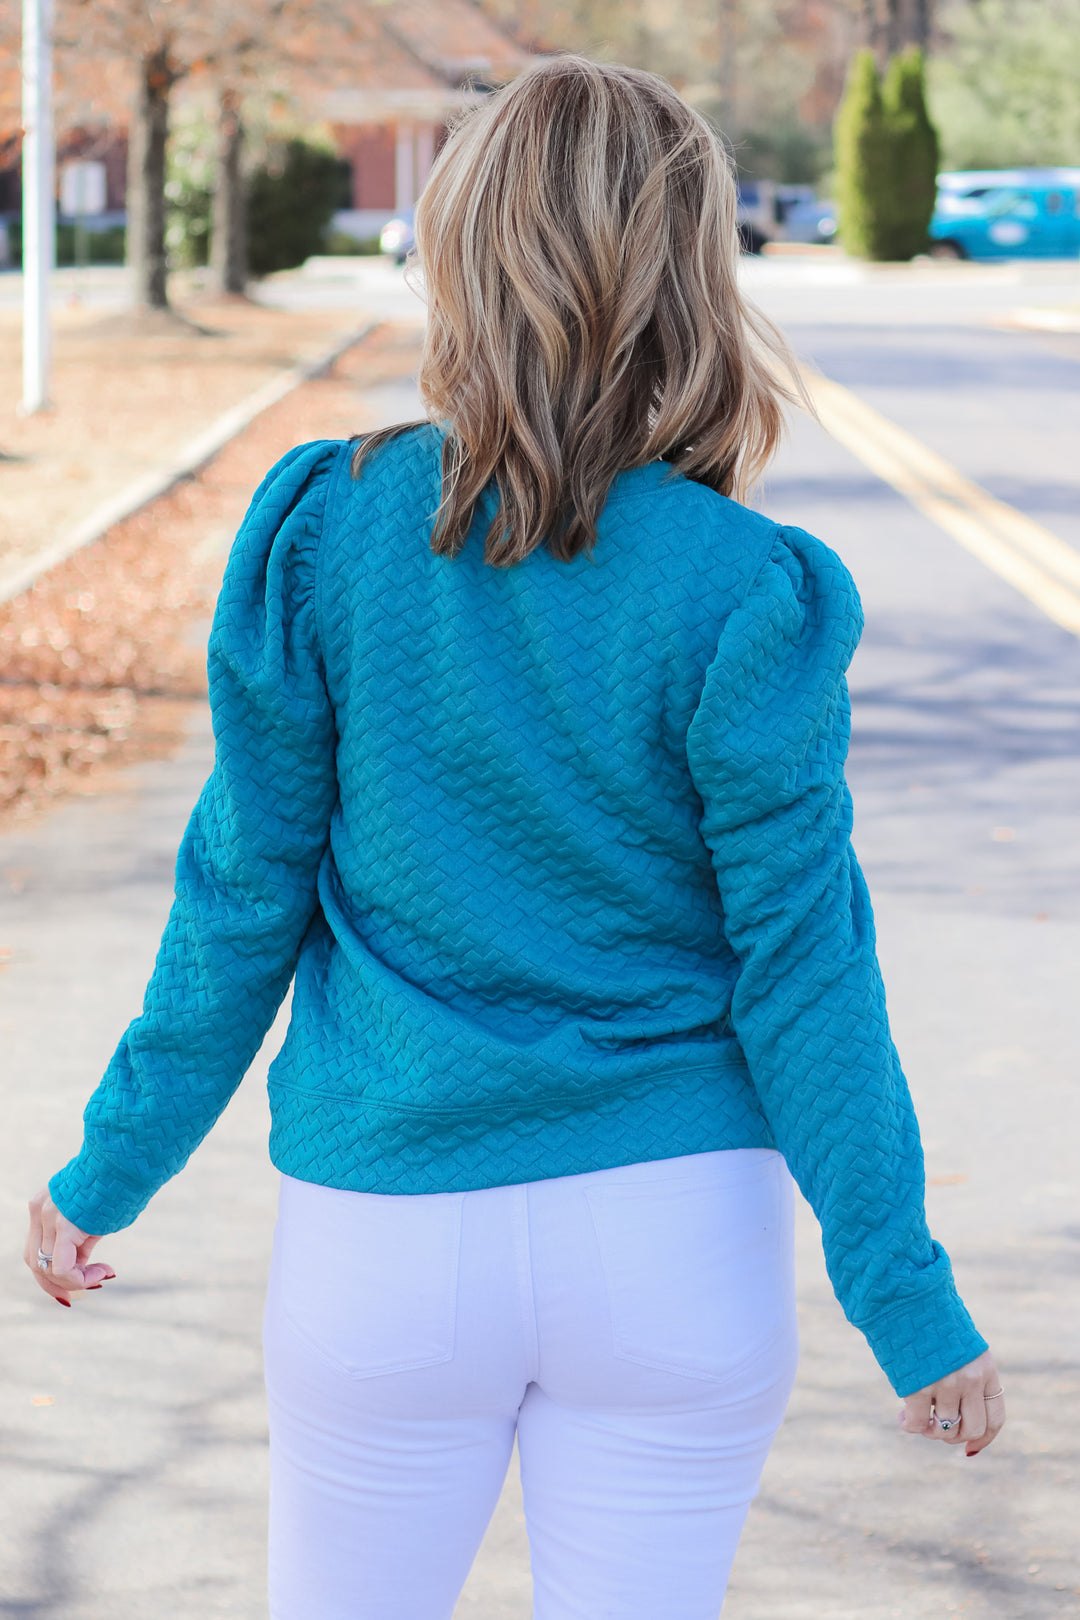 A blonde woman standing outside wearing a teal quilted puff sleeve sweatshirt and white jeans. She is rear facing.